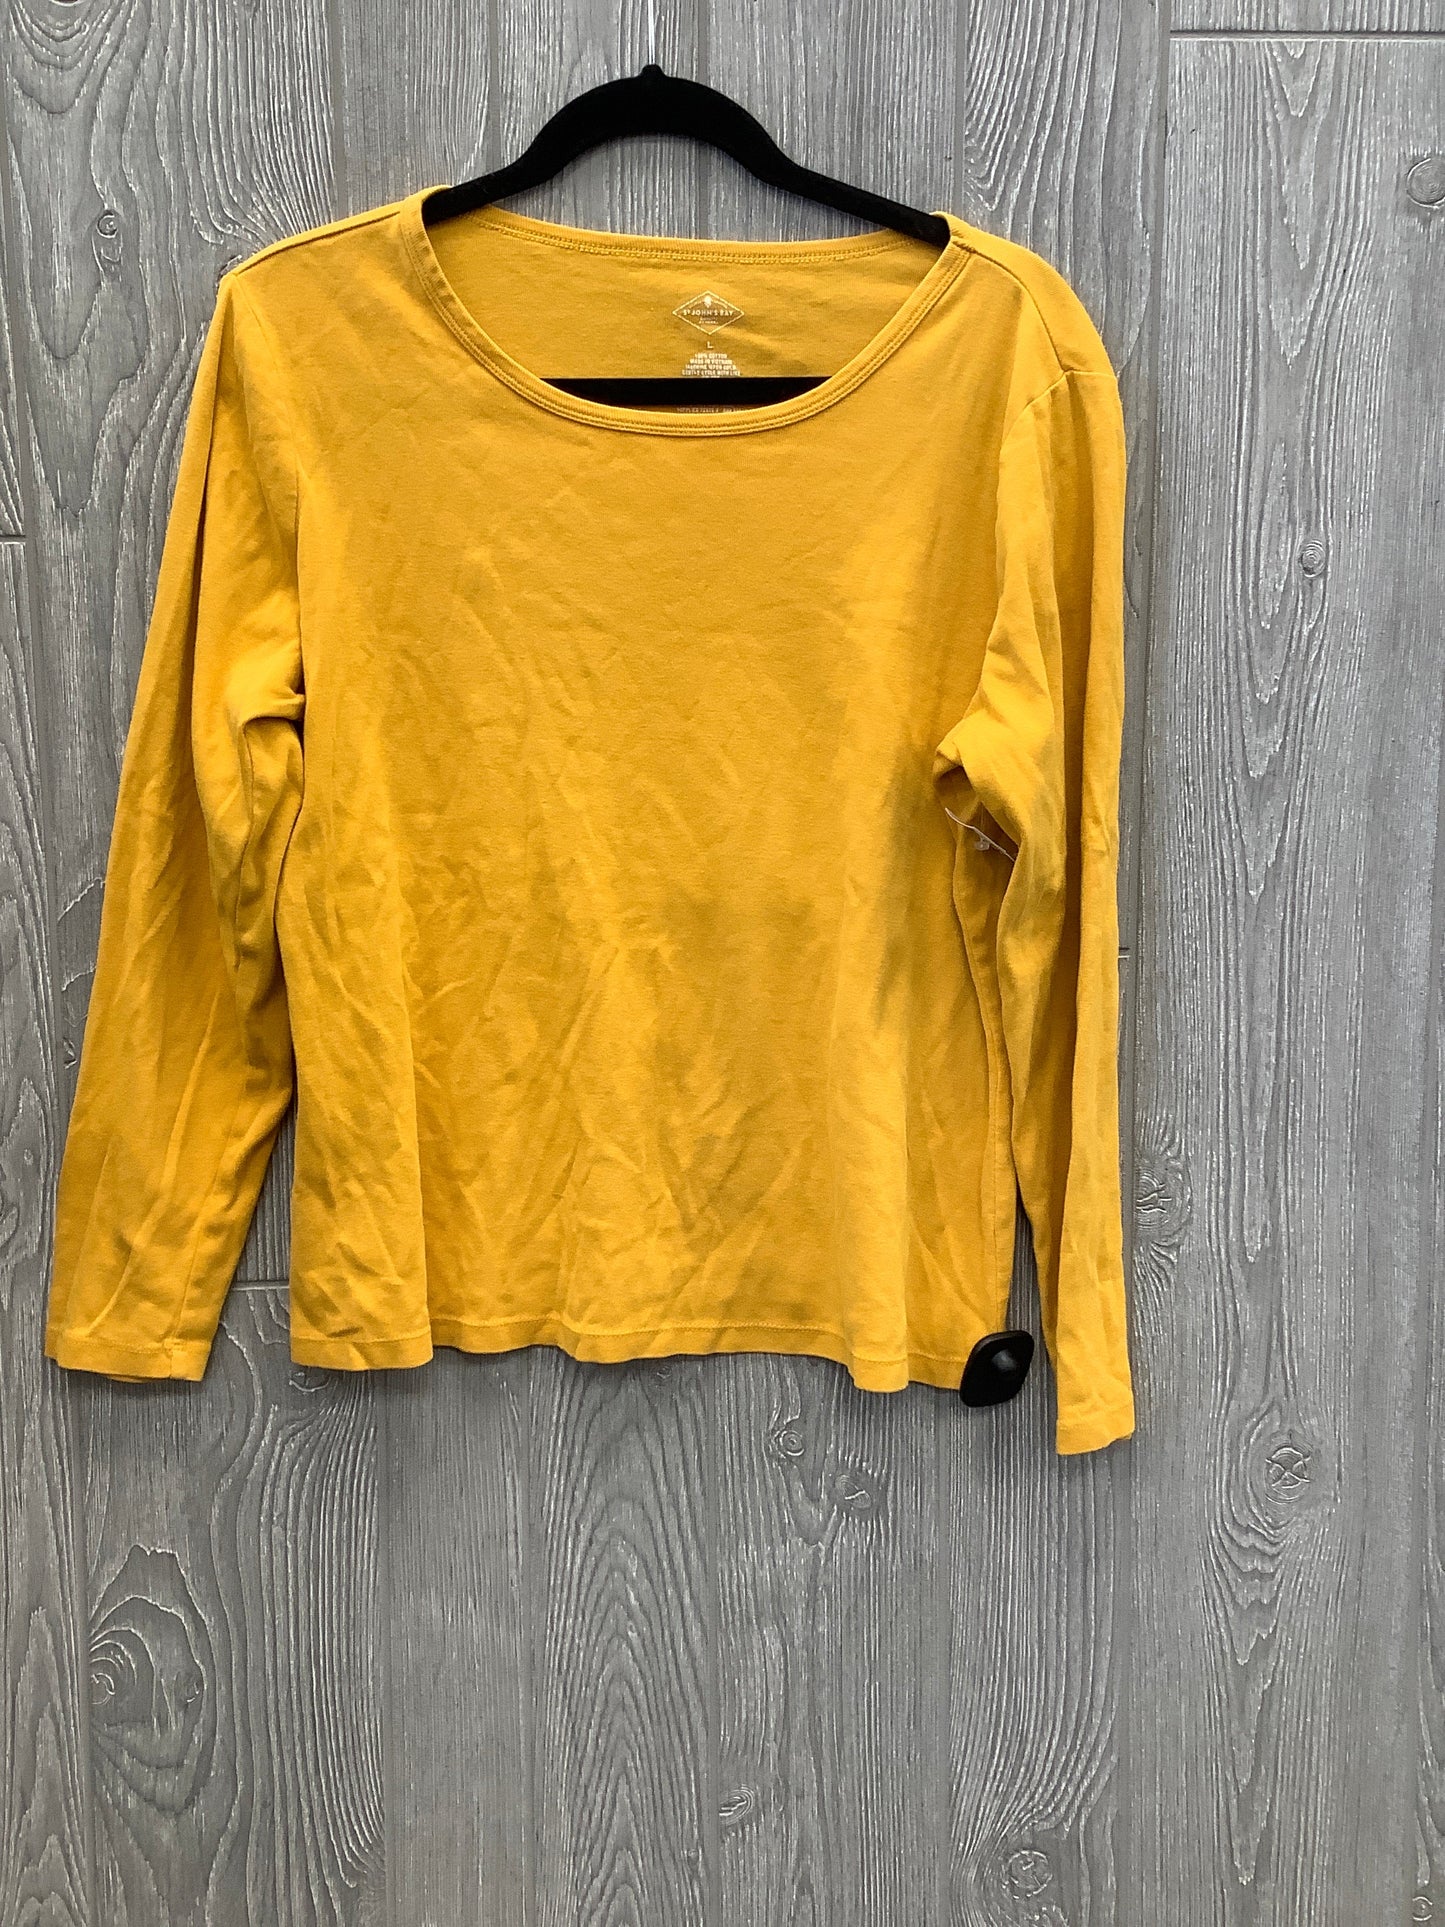 Yellow Top Long Sleeve St Johns Bay, Size L